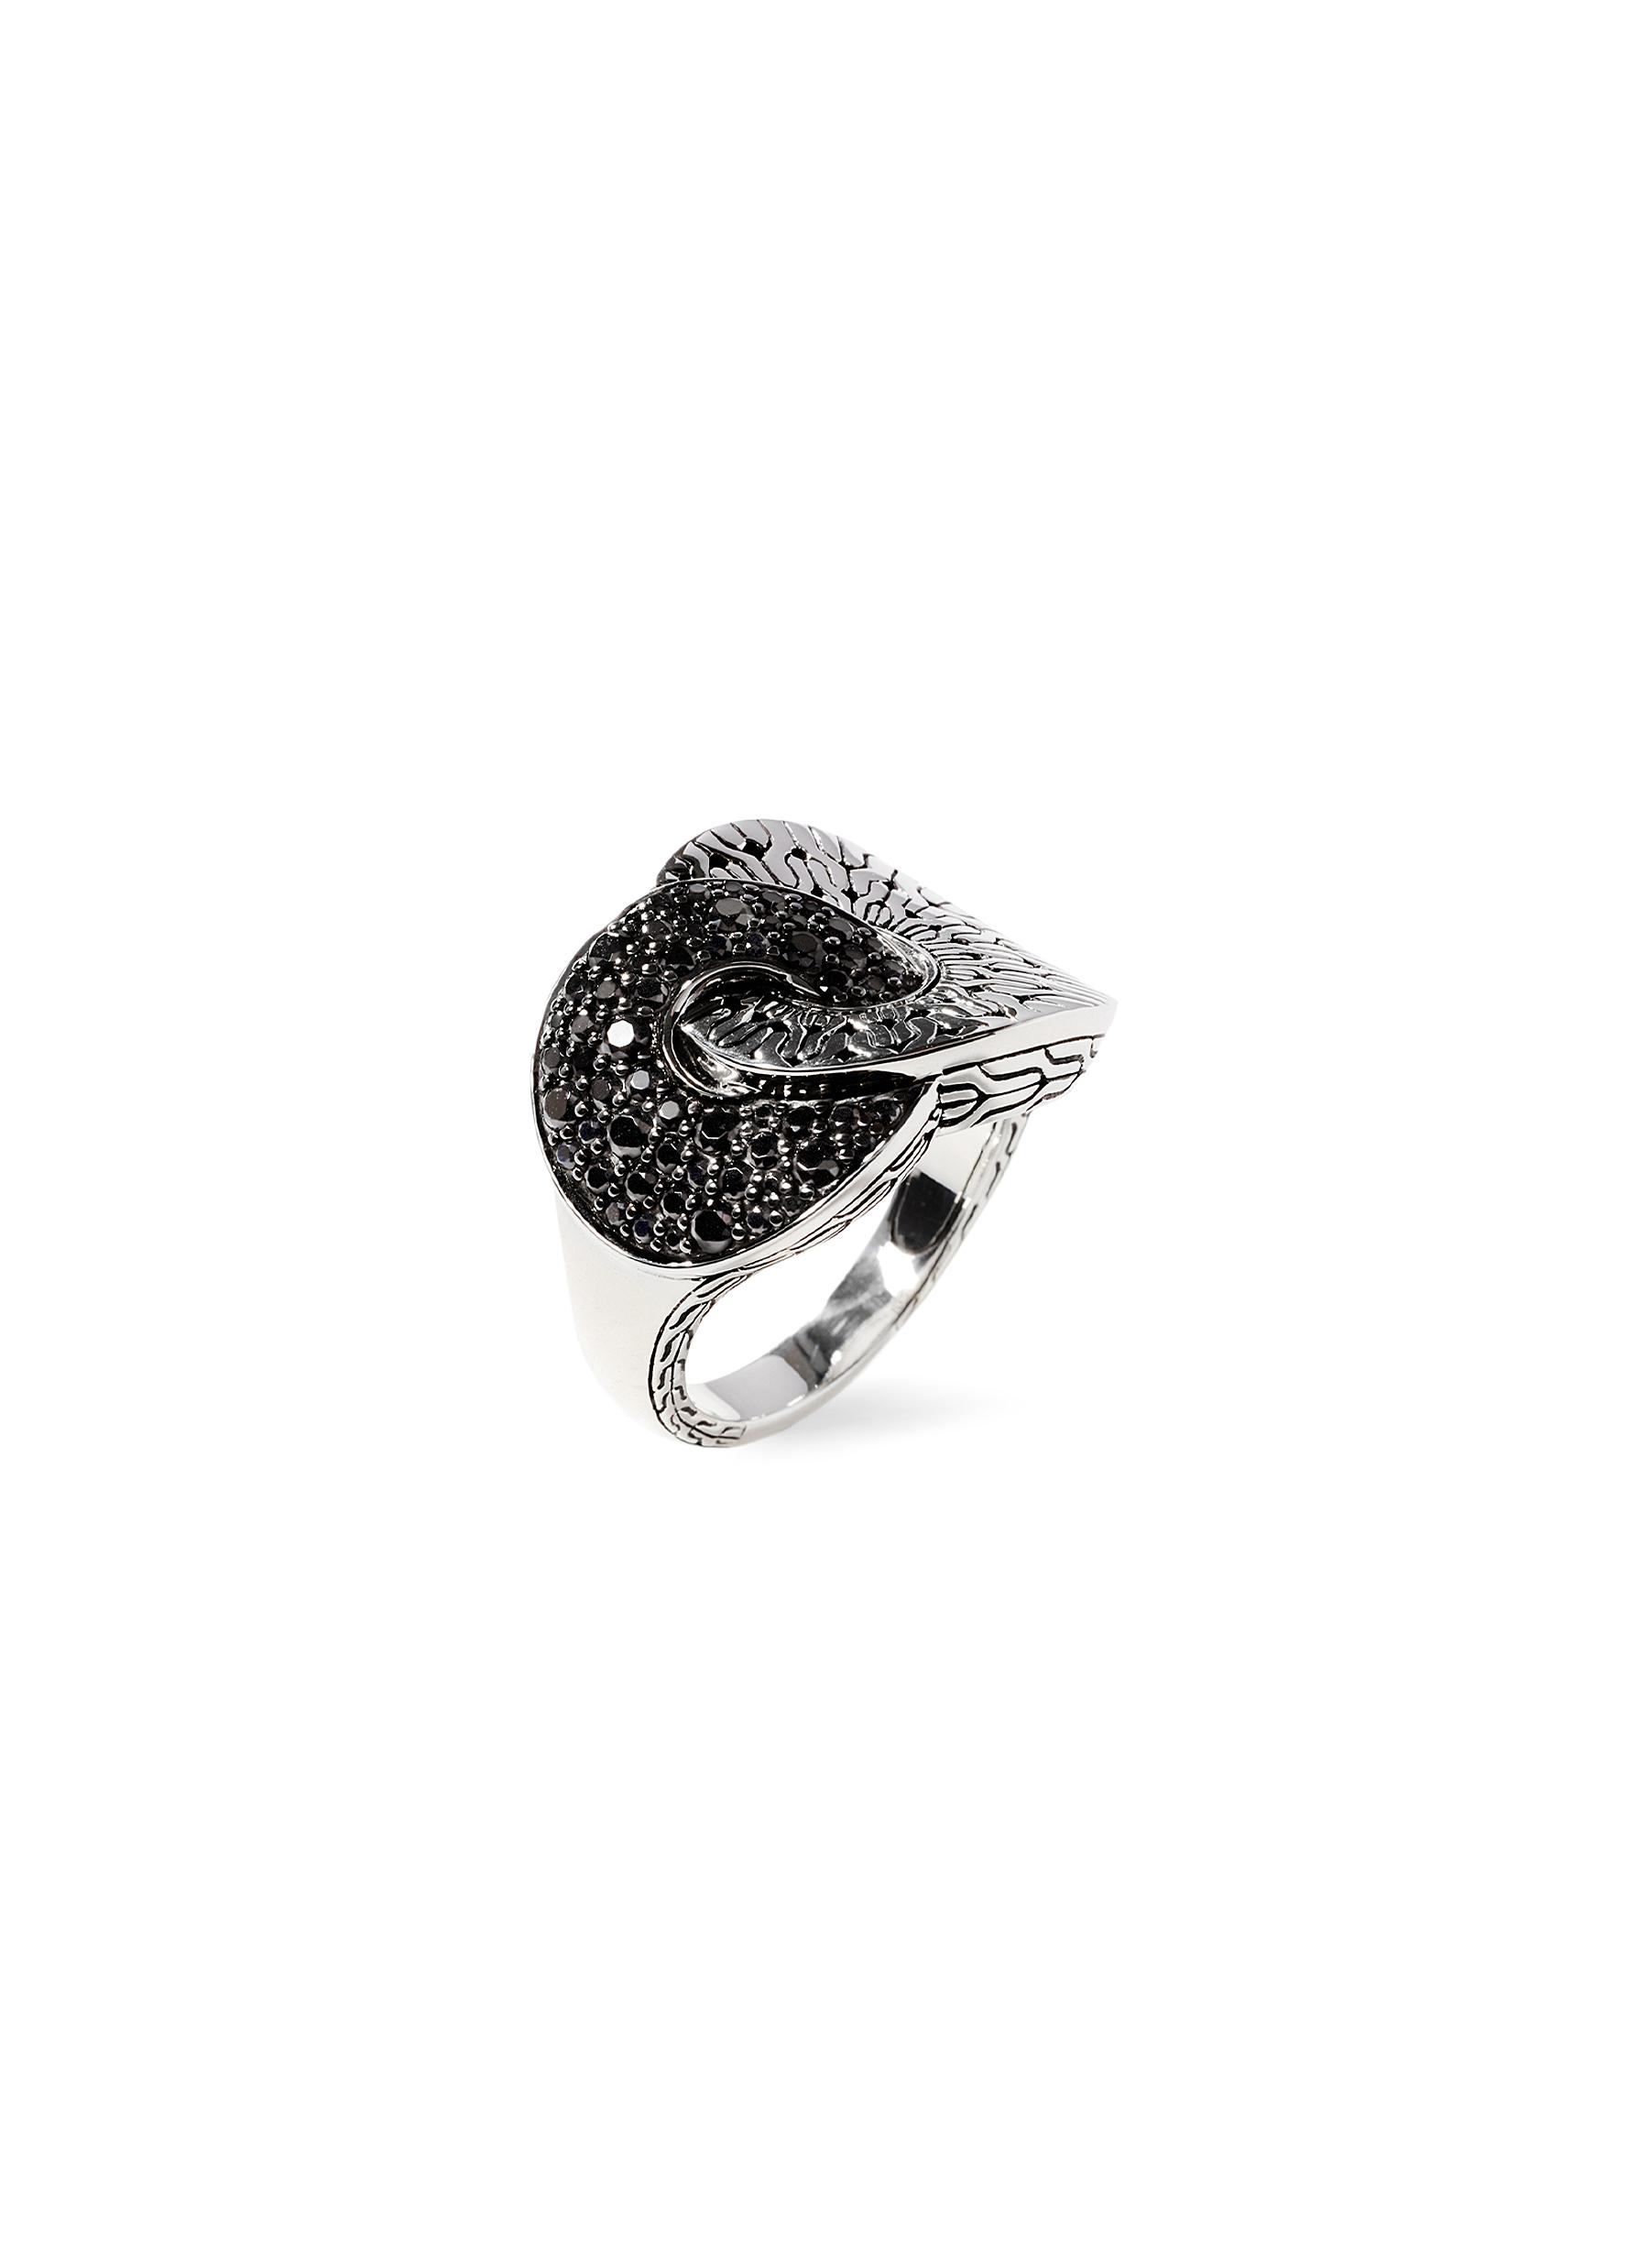 JOHN HARDY ‘CLASSIC CHAIN' TREATED BLACK SAPPHIRE SPINEL STERLING SILVER HAMMERED RING